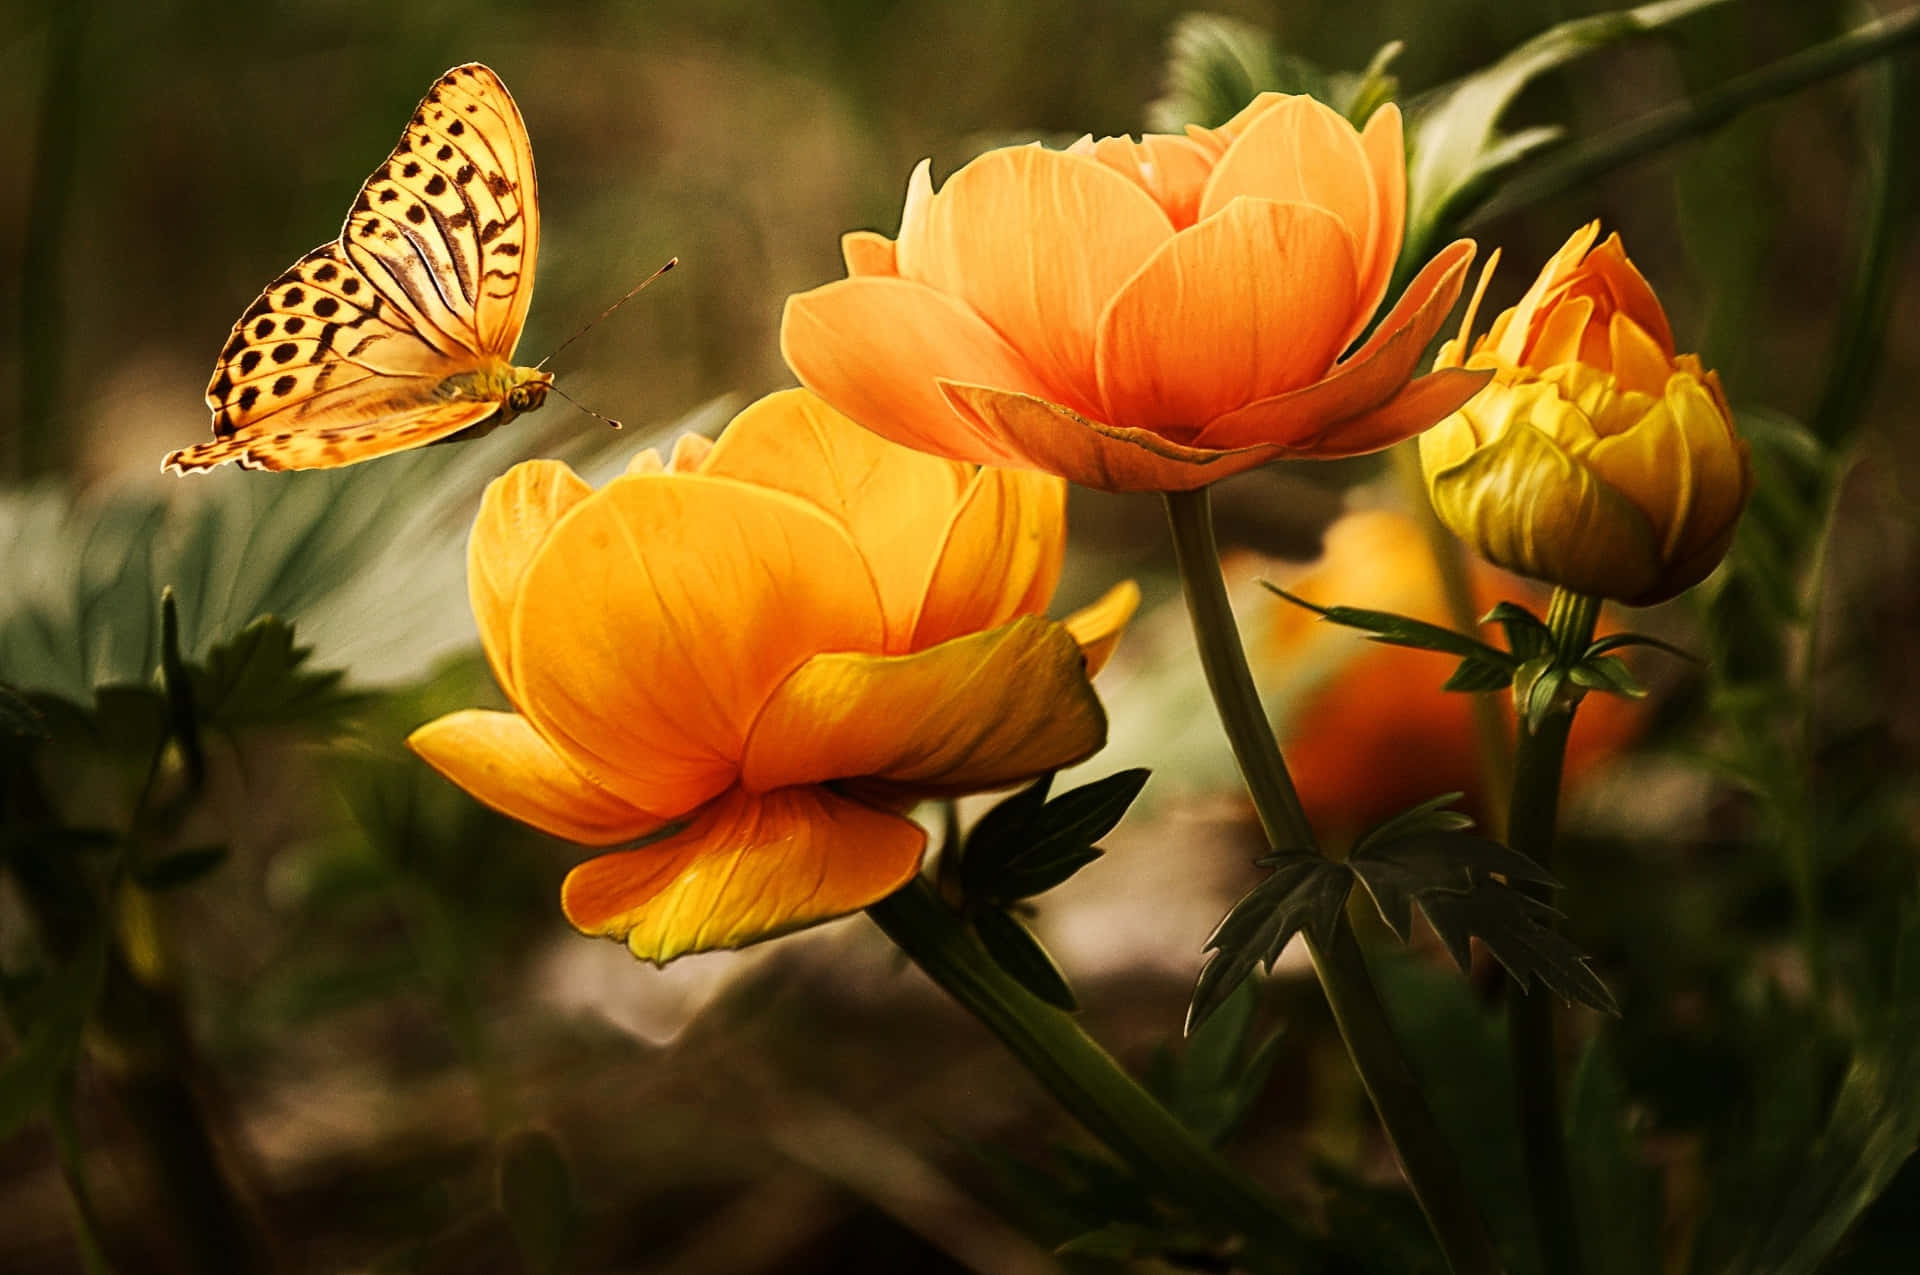 A Butterfly Is Flying Over The Flowers